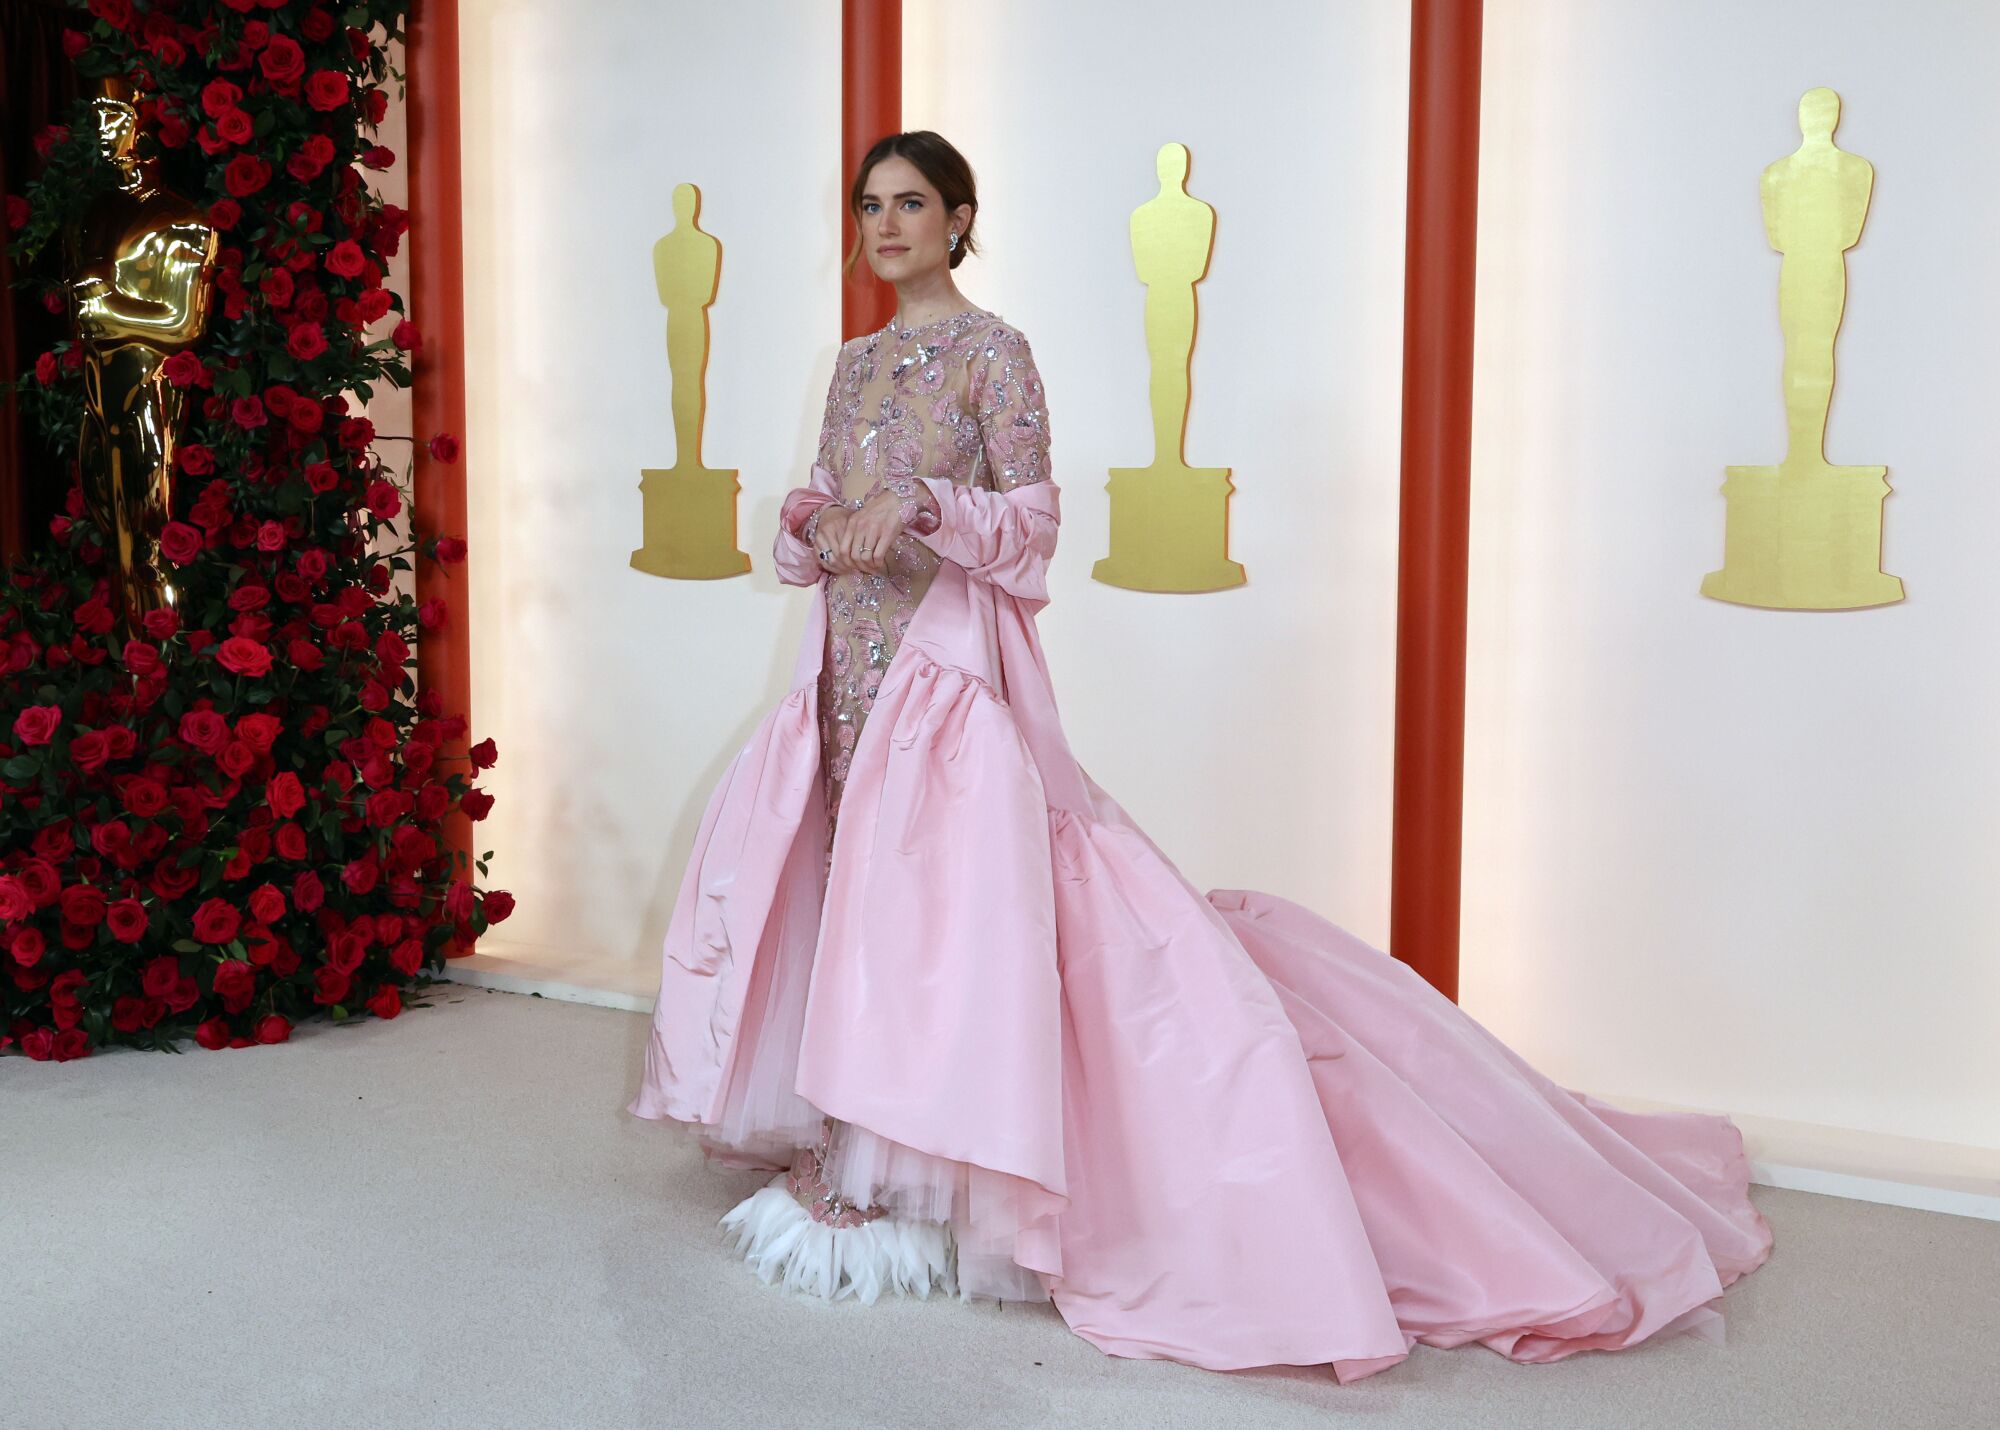 Allison Williams on the red carpet at the 2023 Oscars.